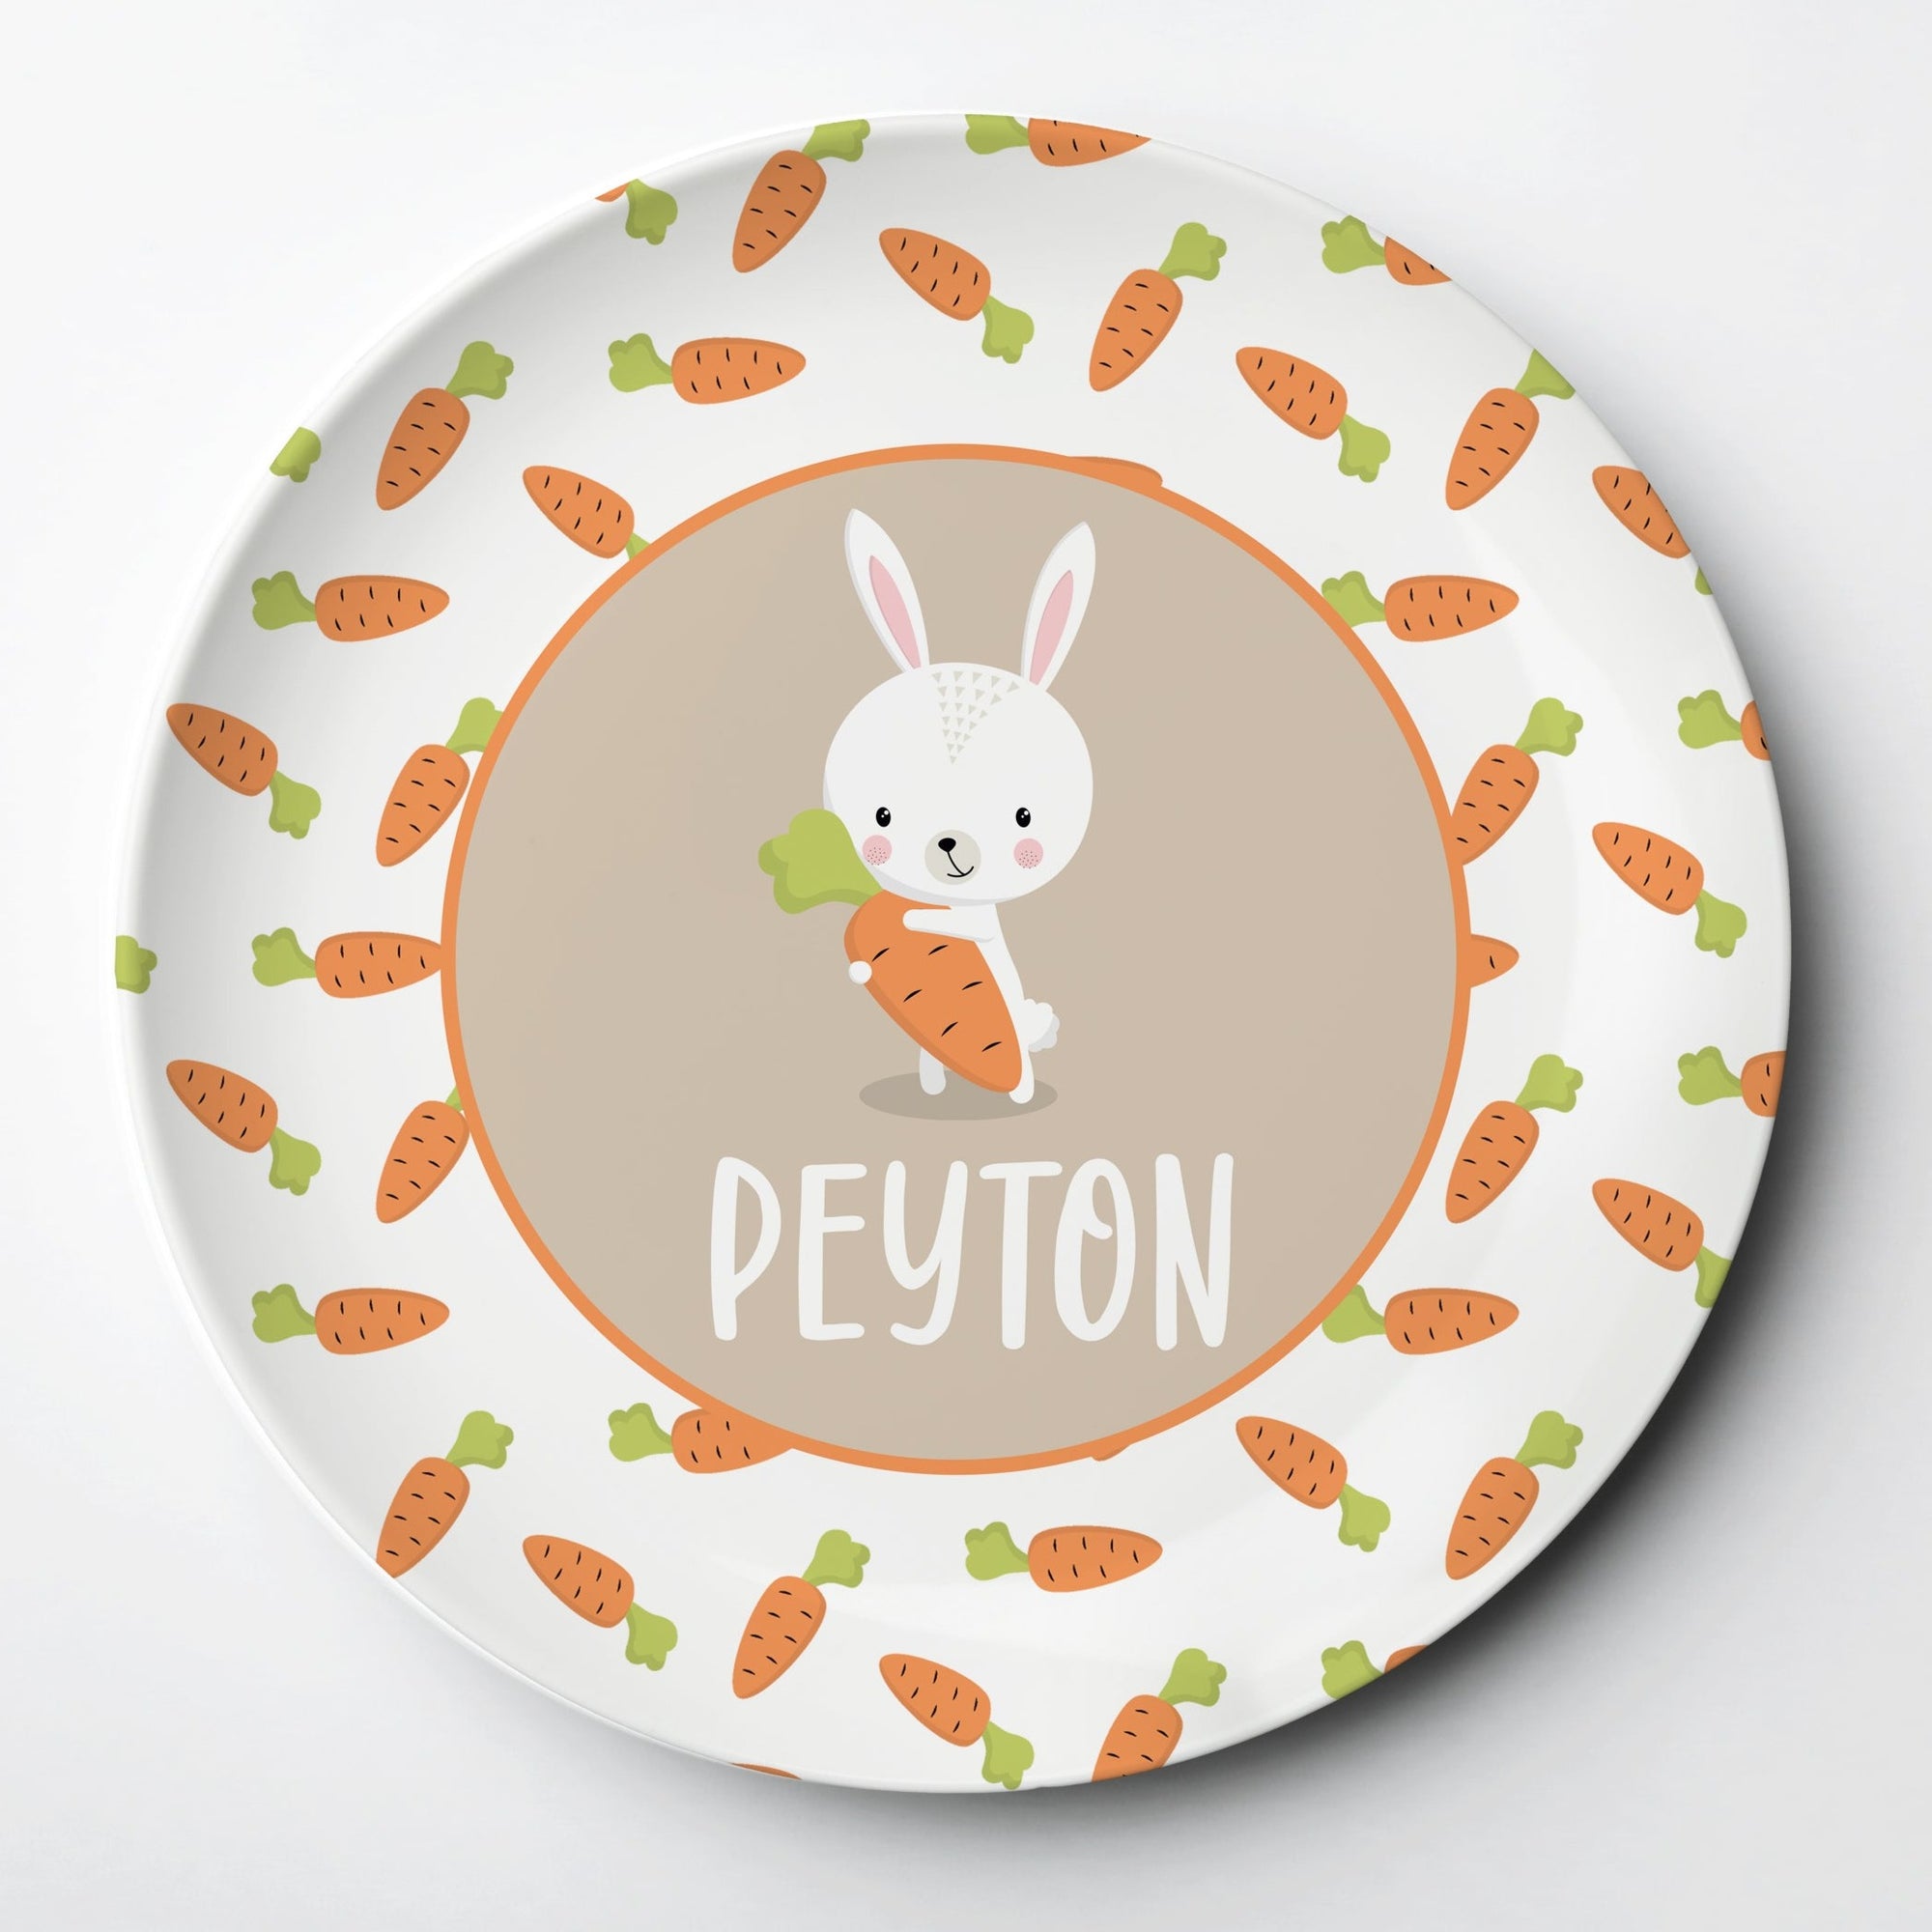 Easter Personalized Kid's Plate with Carrots and a sweet bunny rabbit, reusable, dishwasher, microwave, and oven safe